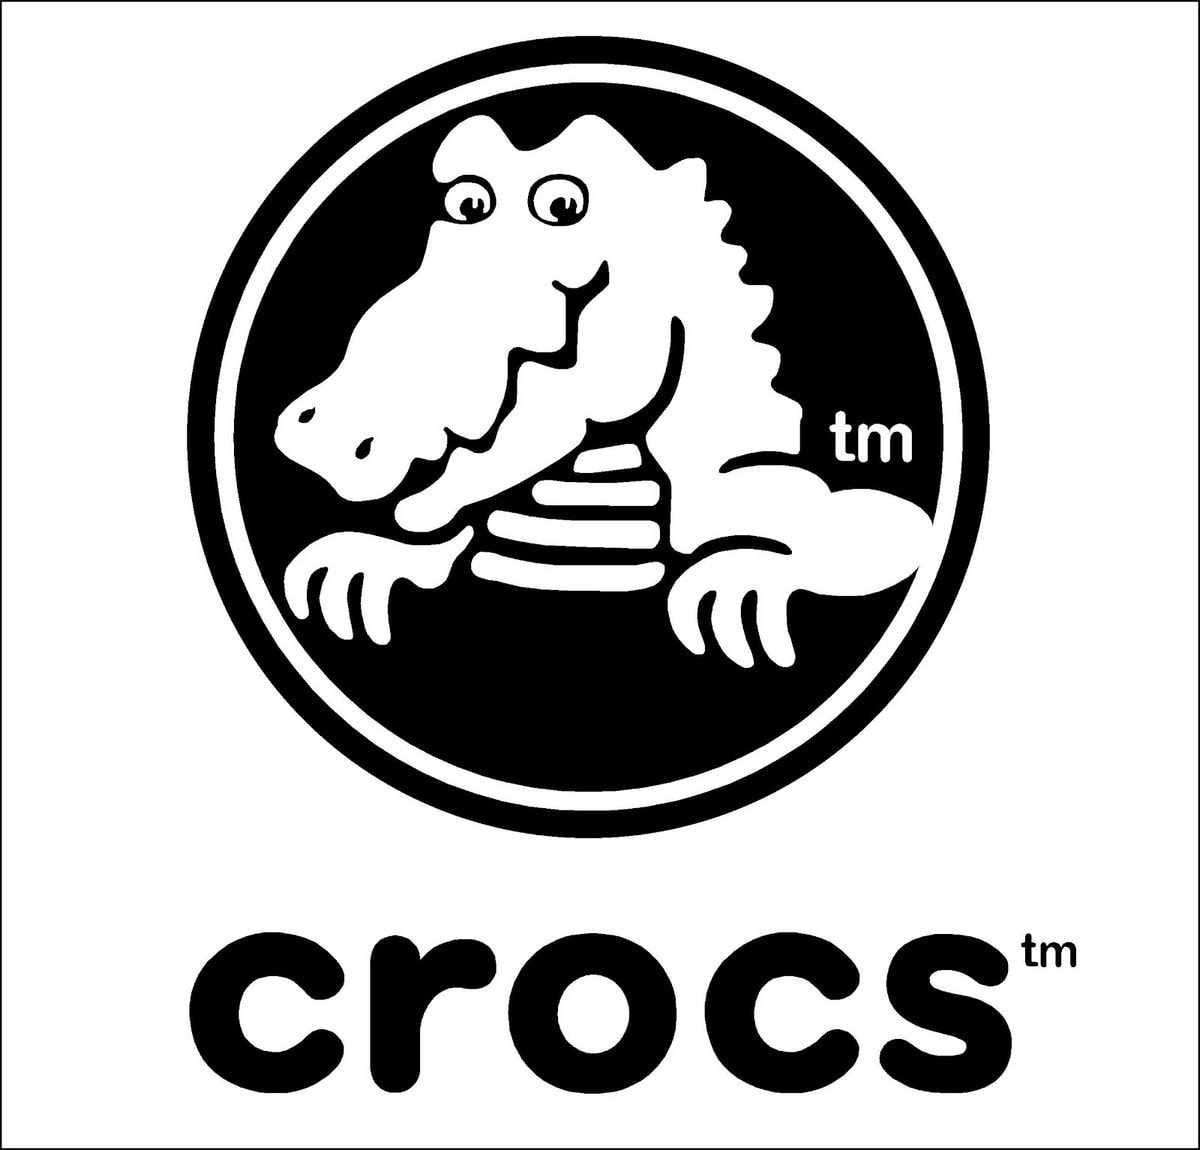 Retail India - Crocs Expands Offline Presence with a New Concept